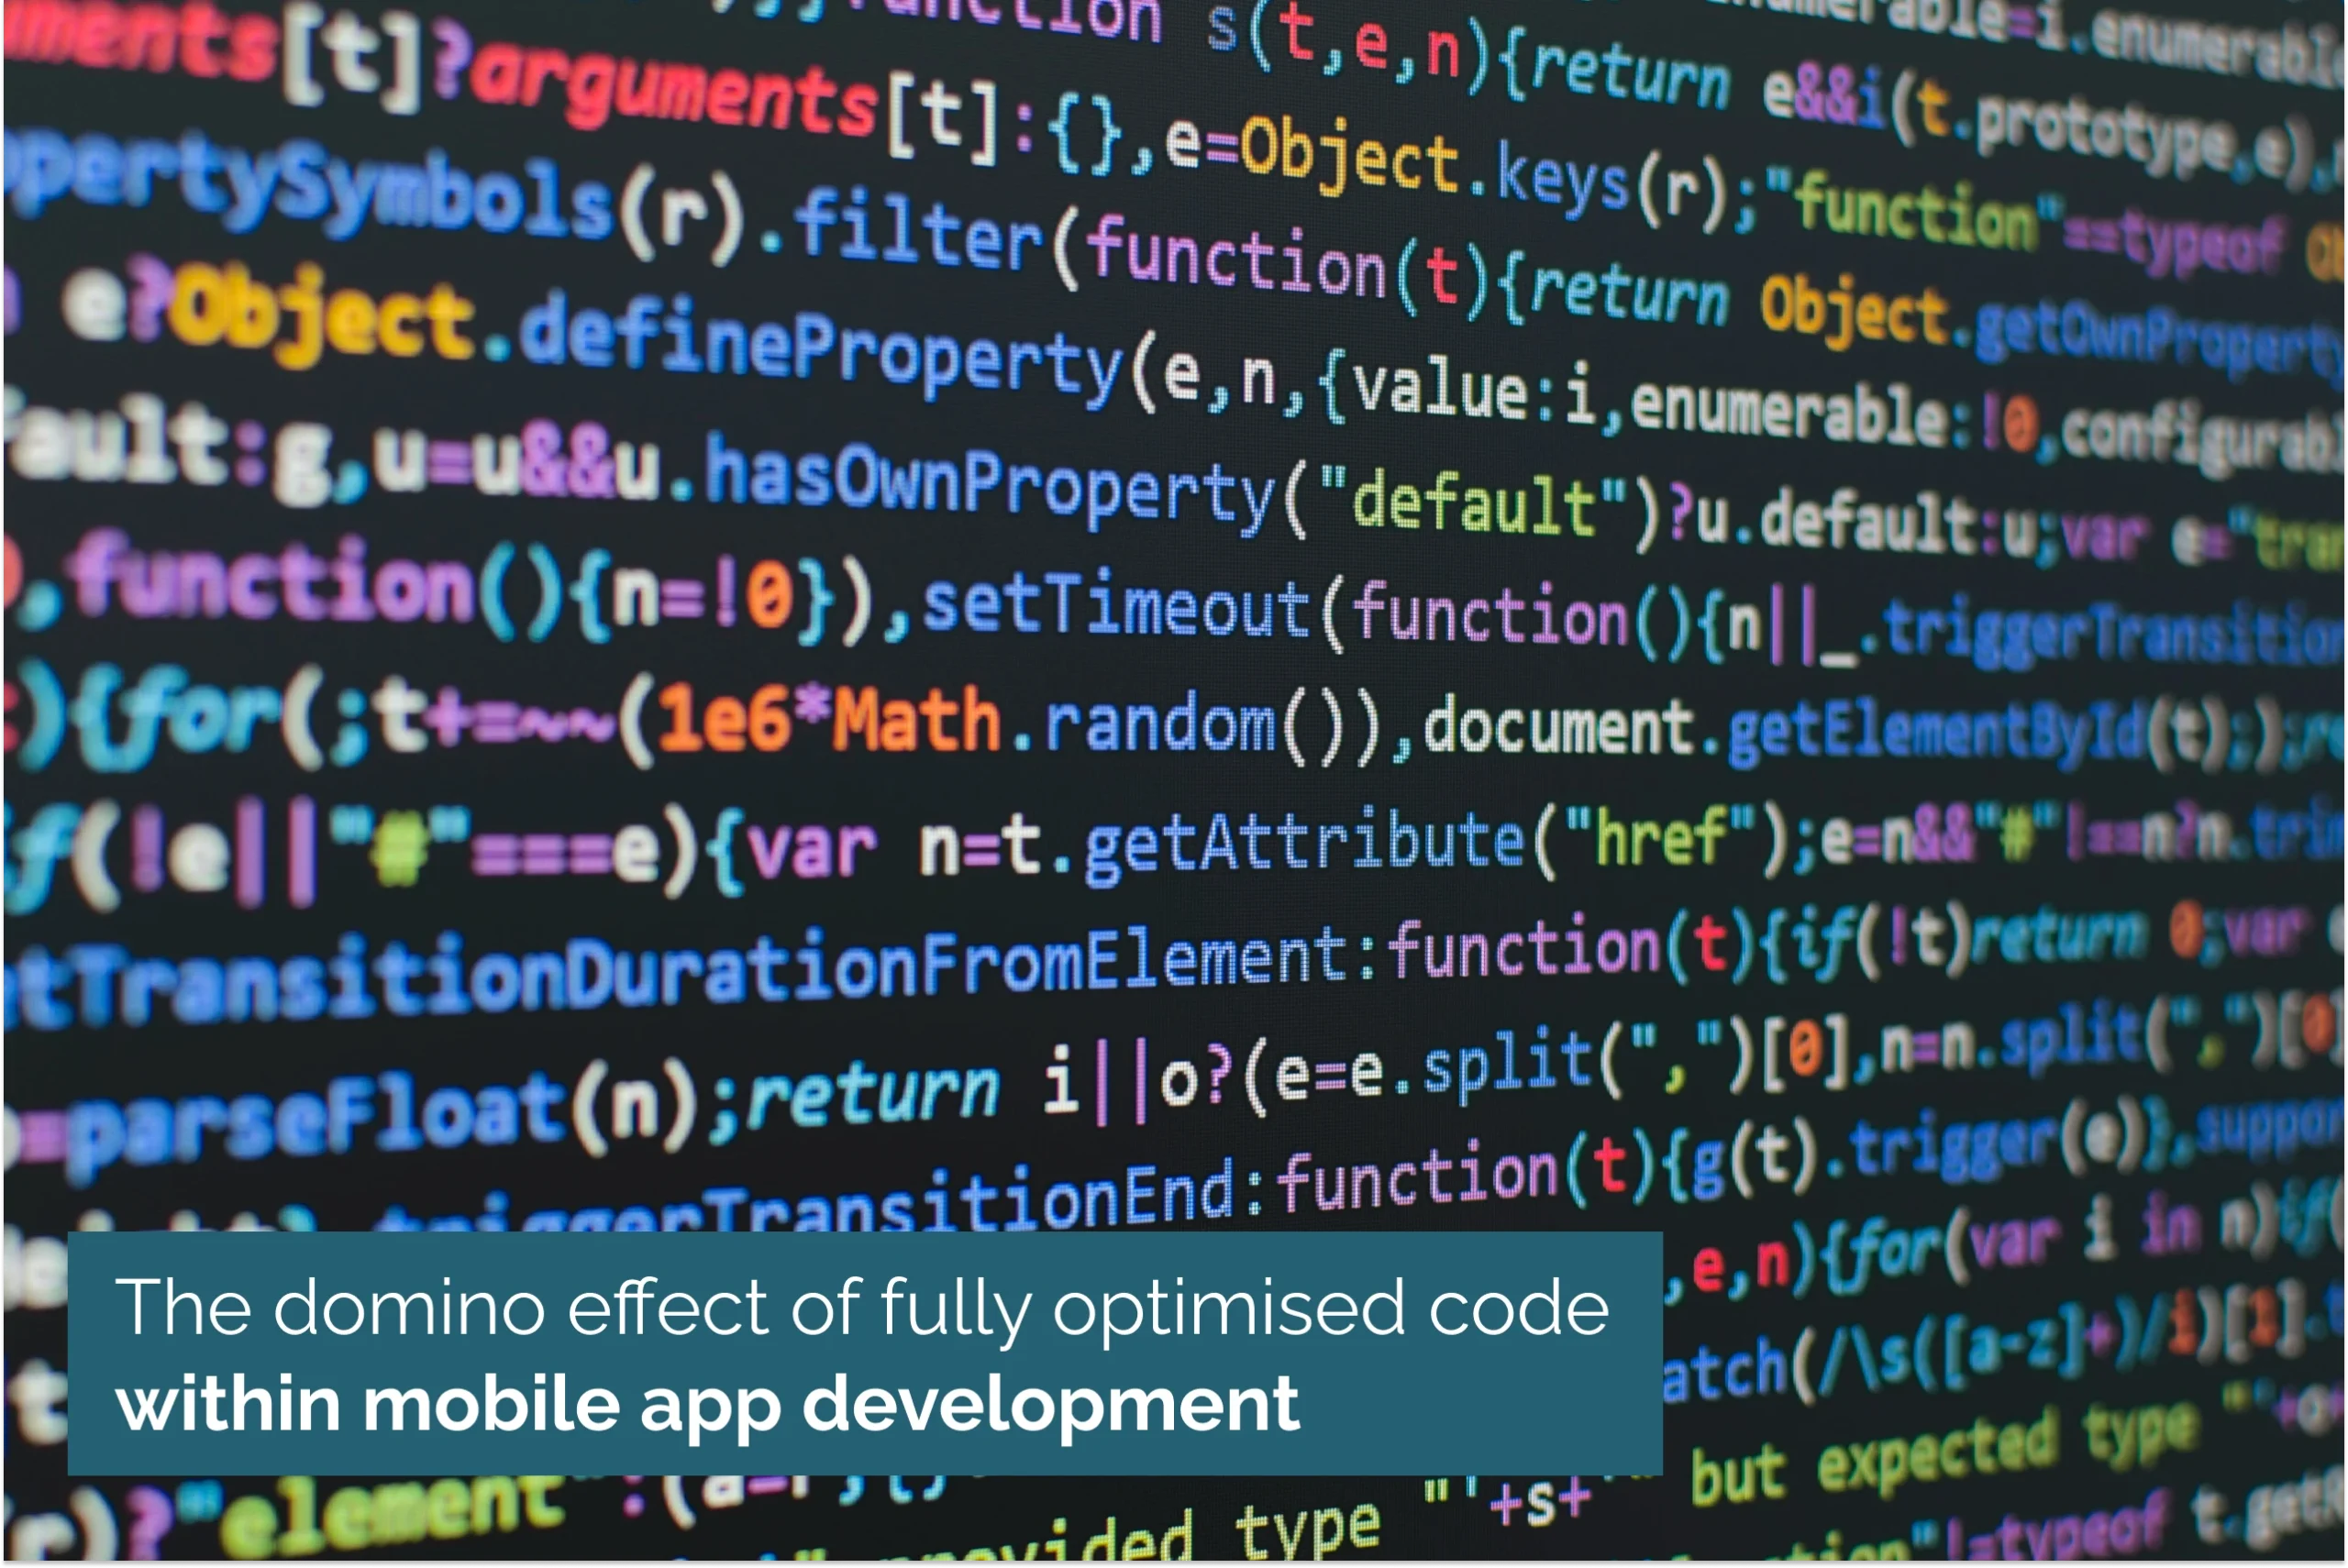 The domino effect of fully optimised code within mobile app development